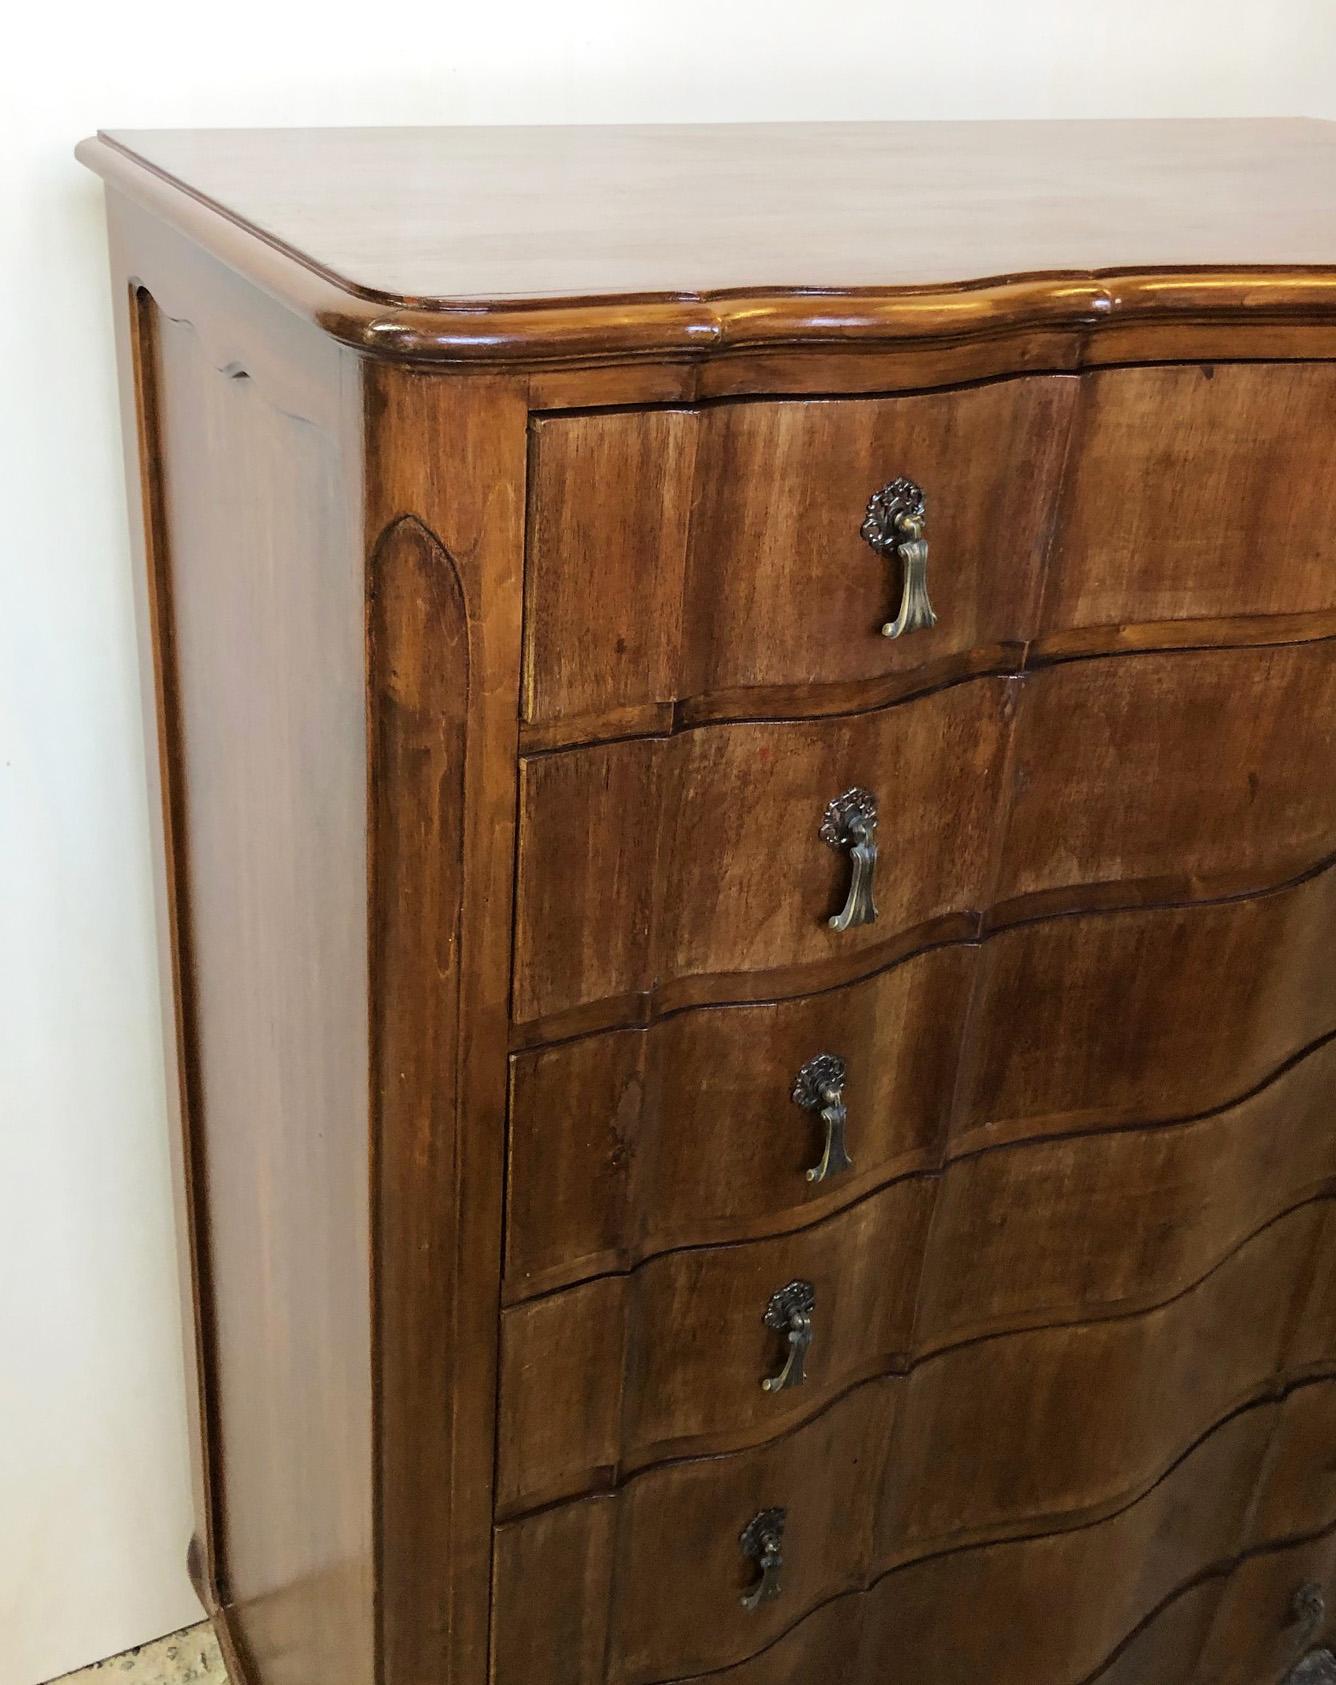 Italian walnut tallboy from 1960, original curved shaped drawers, period handles.
Coming from a historic villa in Pisa.
The paint is original in patina, honey amber color. 
As shown in the photographs and videos, there are some small imperfect spots